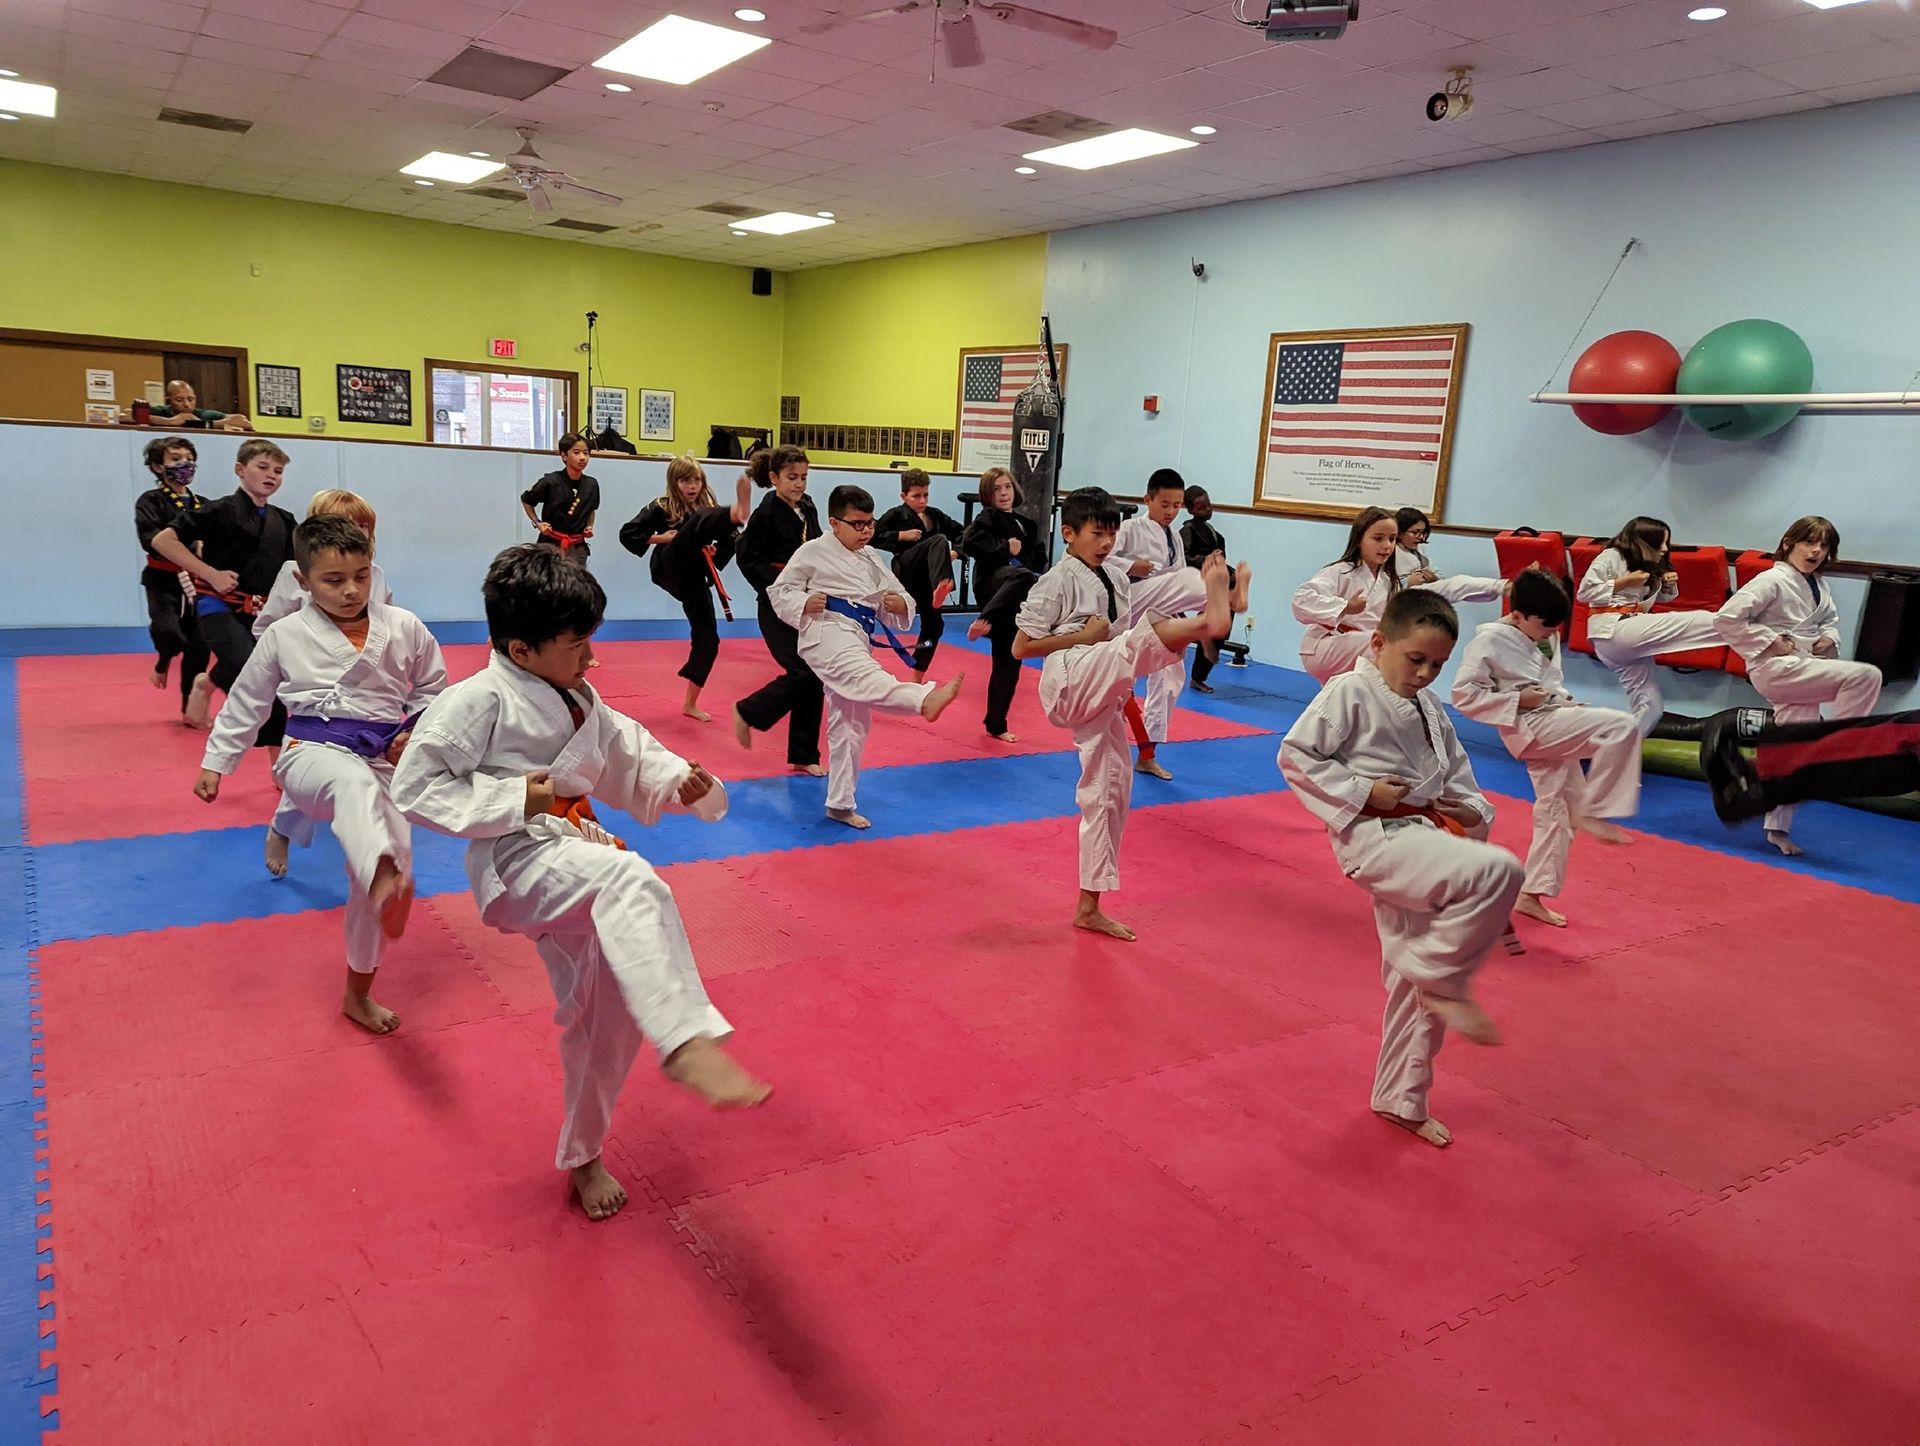 a group of kids are practicing martial arts in a gym